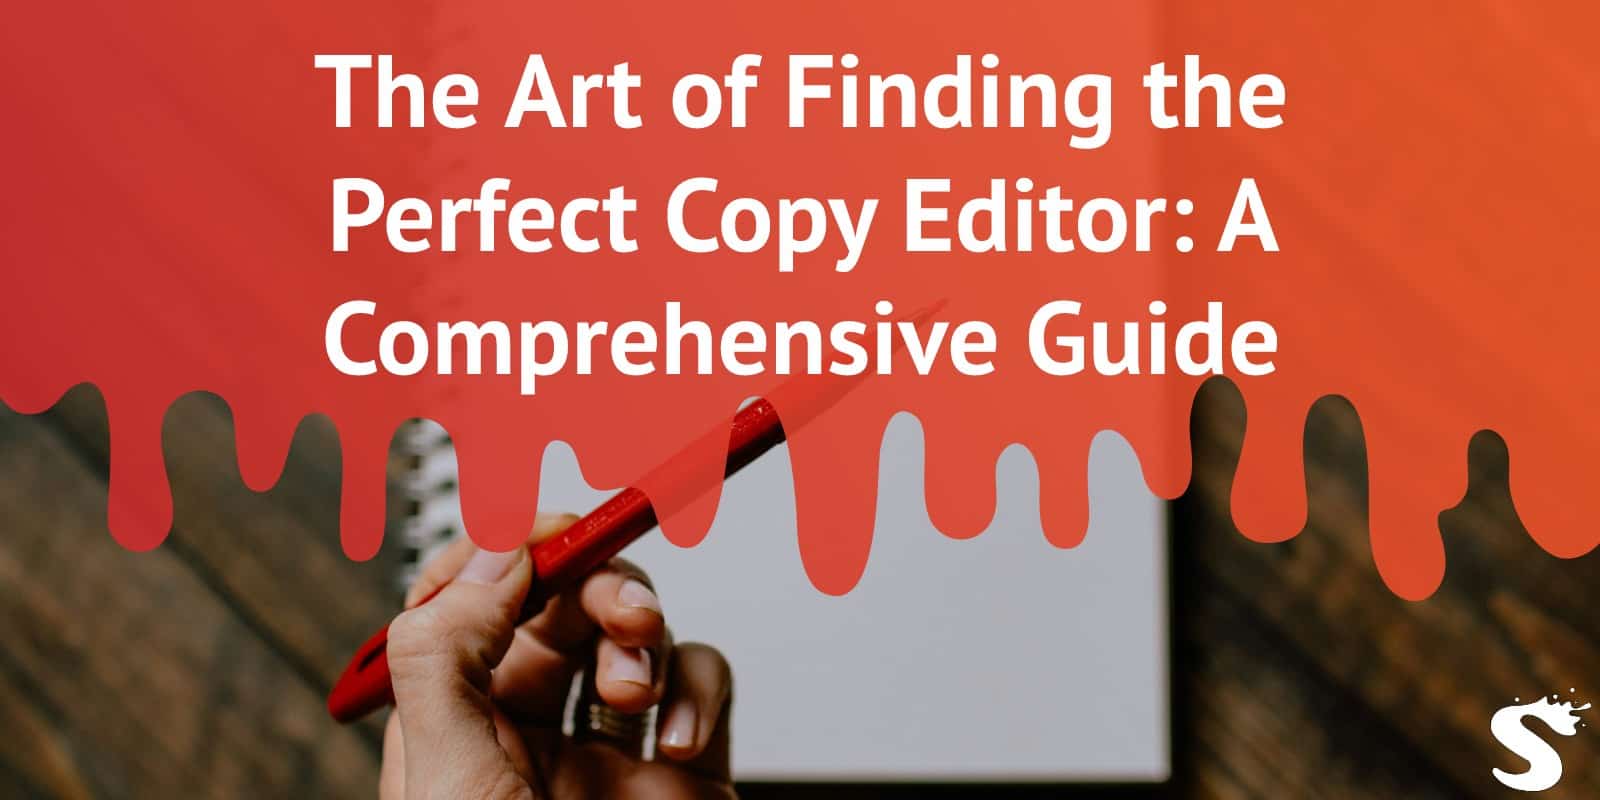 The Art of Finding the Perfect Copy Editor: A Comprehensive Guide